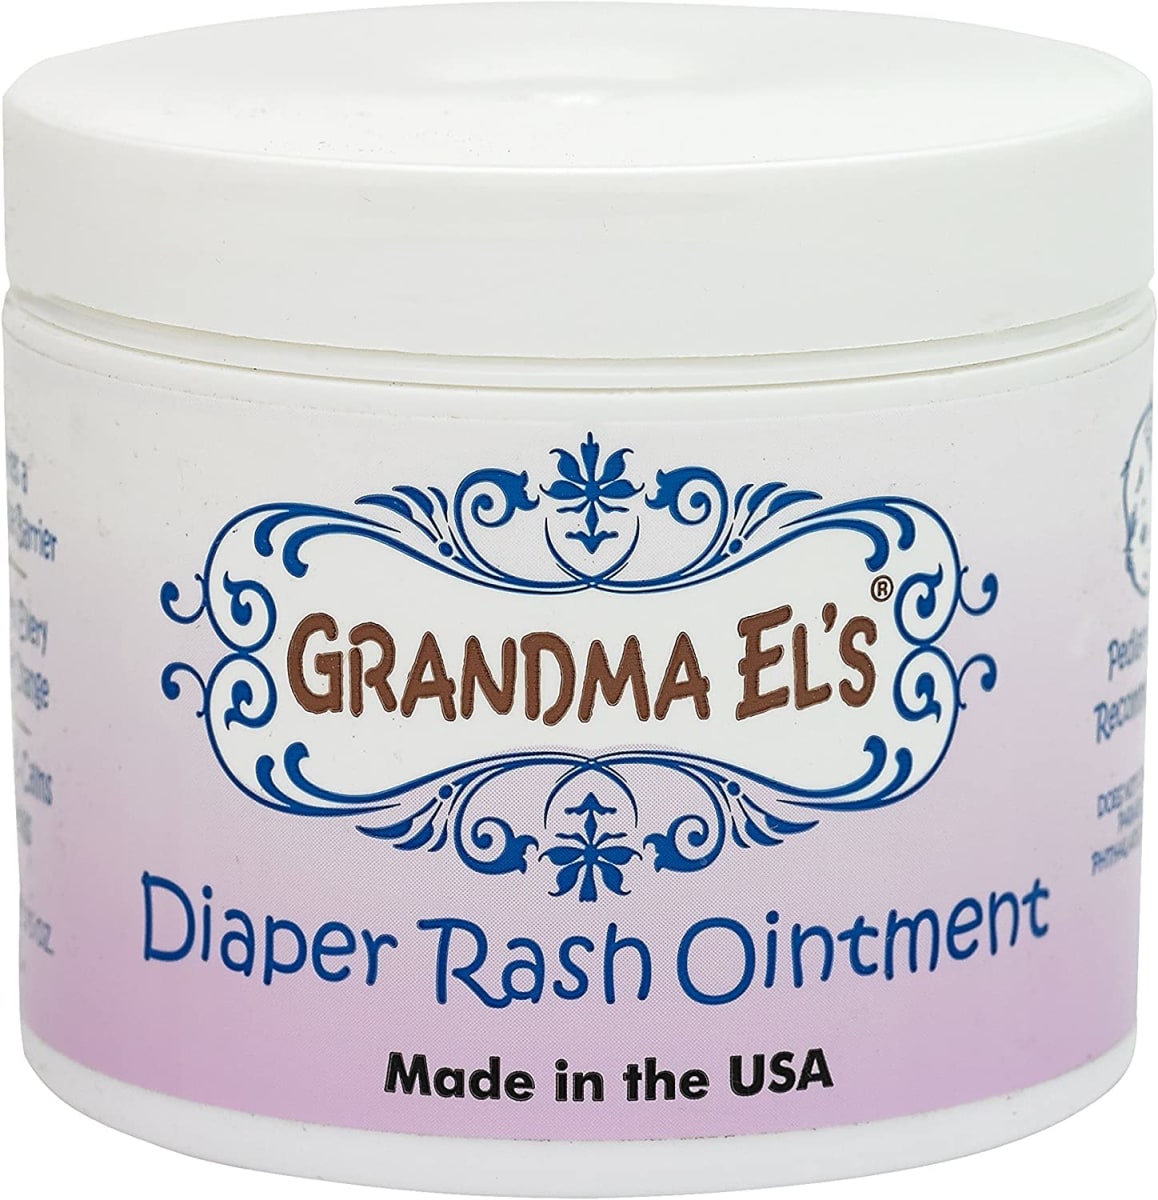 Diaper Rash Remedy and Prevention Baby Ointment Jar